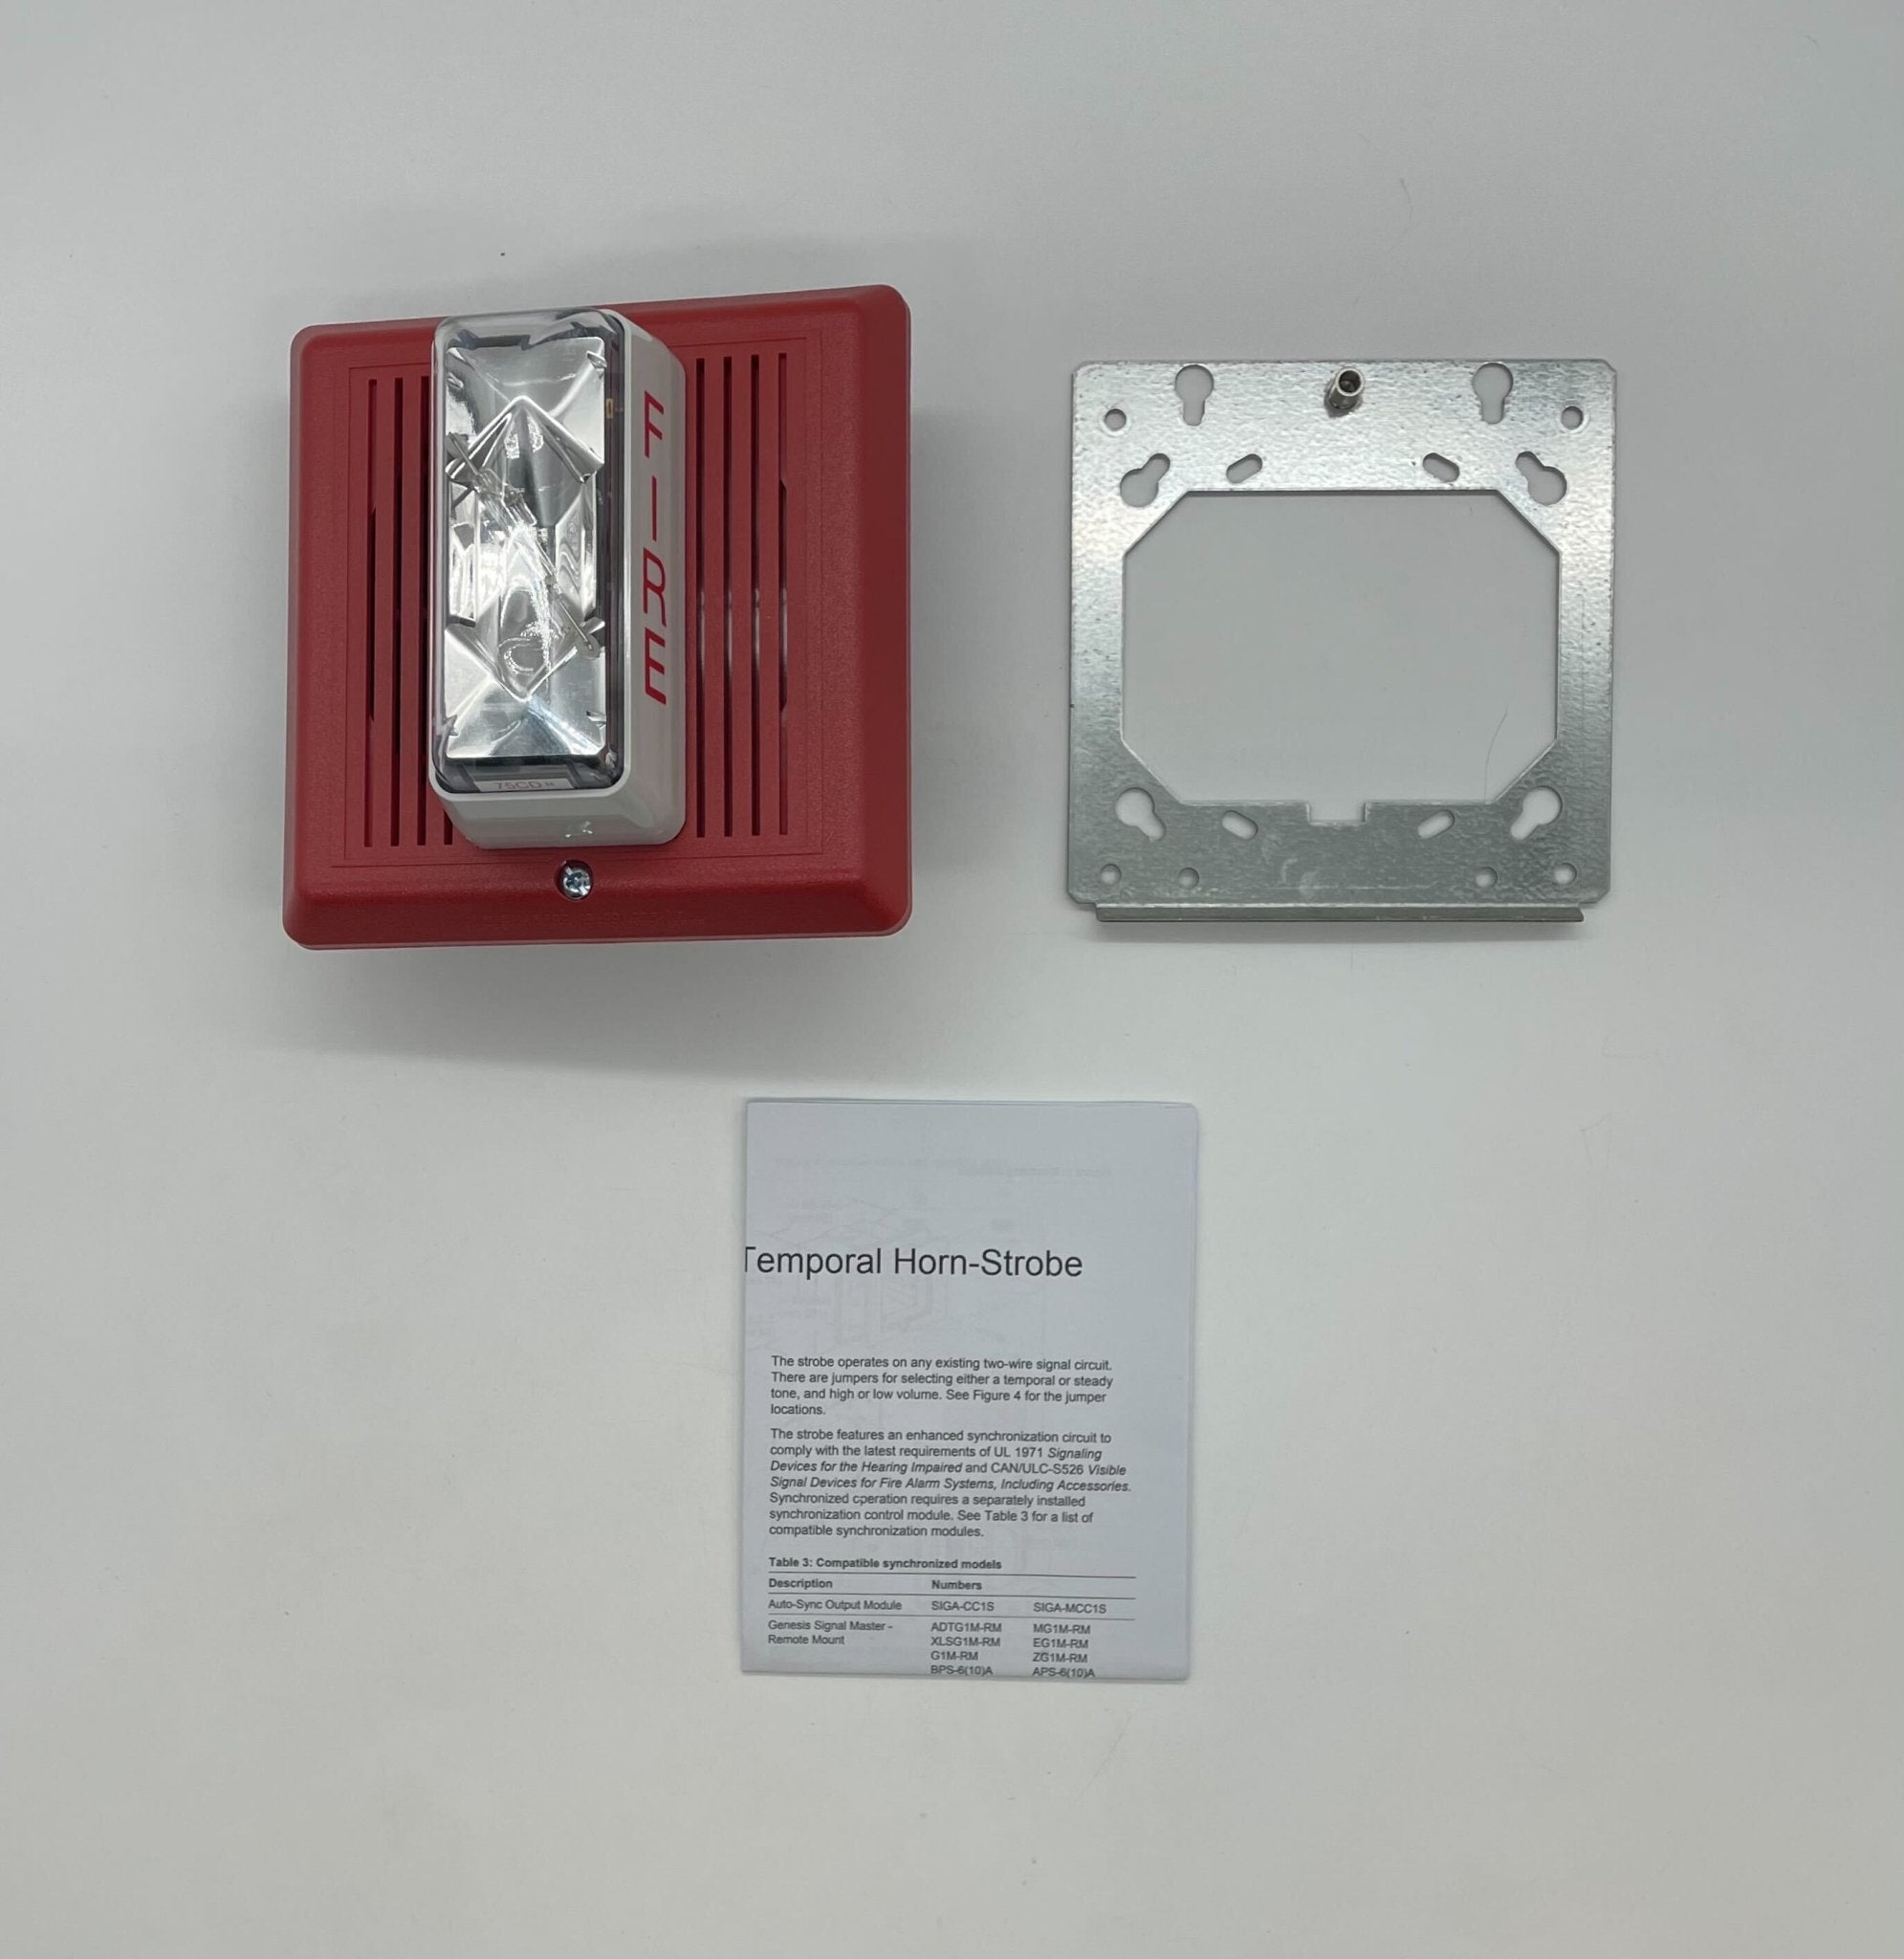 Edwards 757-4A-T - The Fire Alarm Supplier